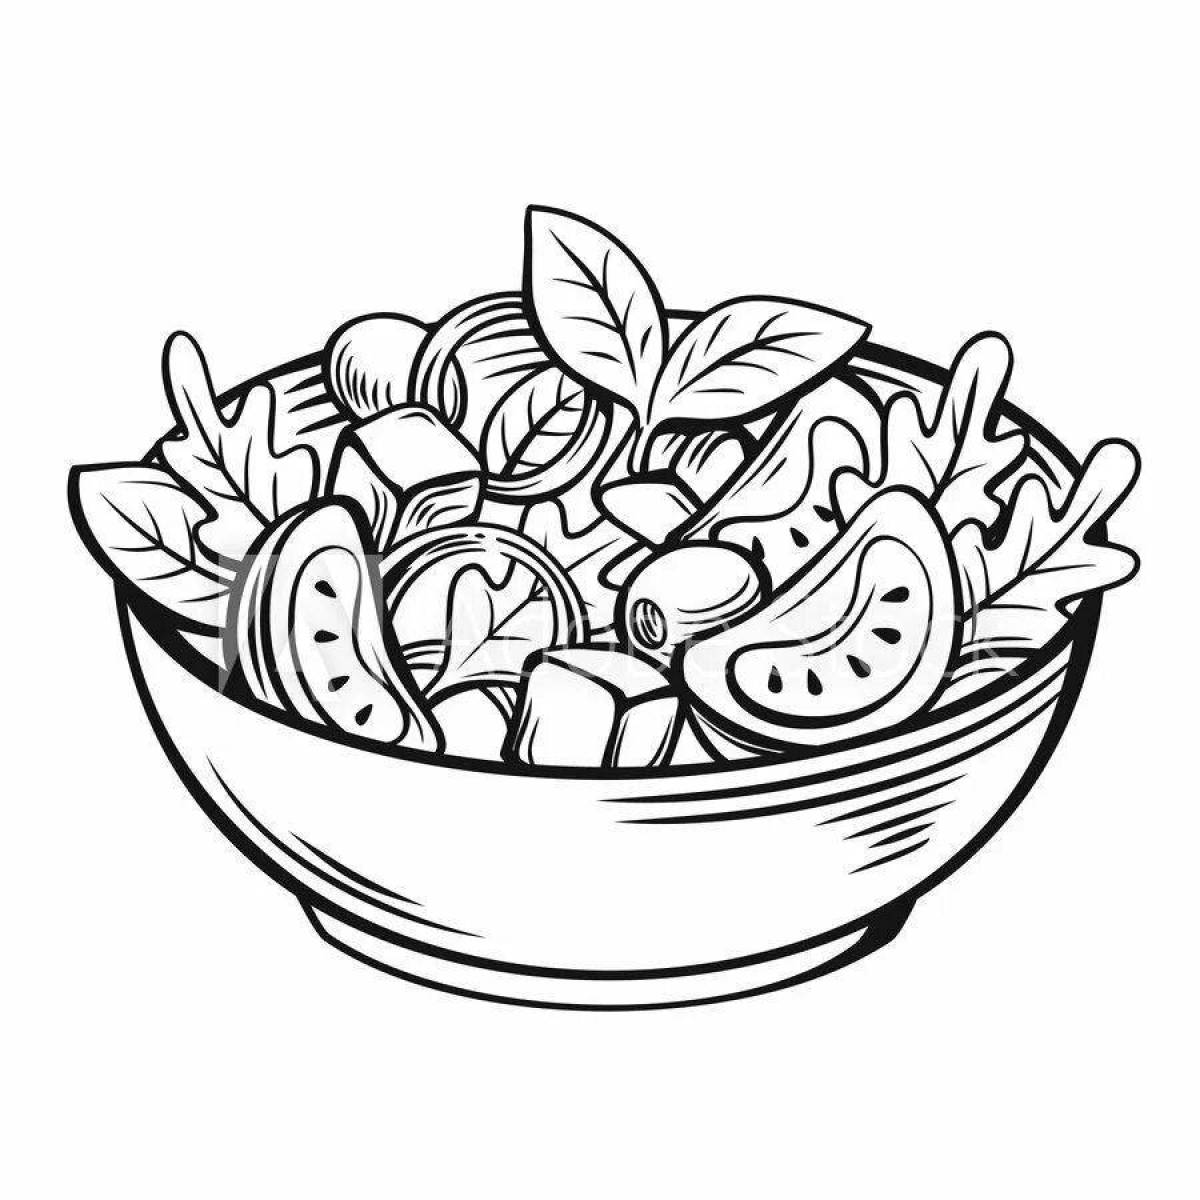 Colour-filled vegetable salad coloring page